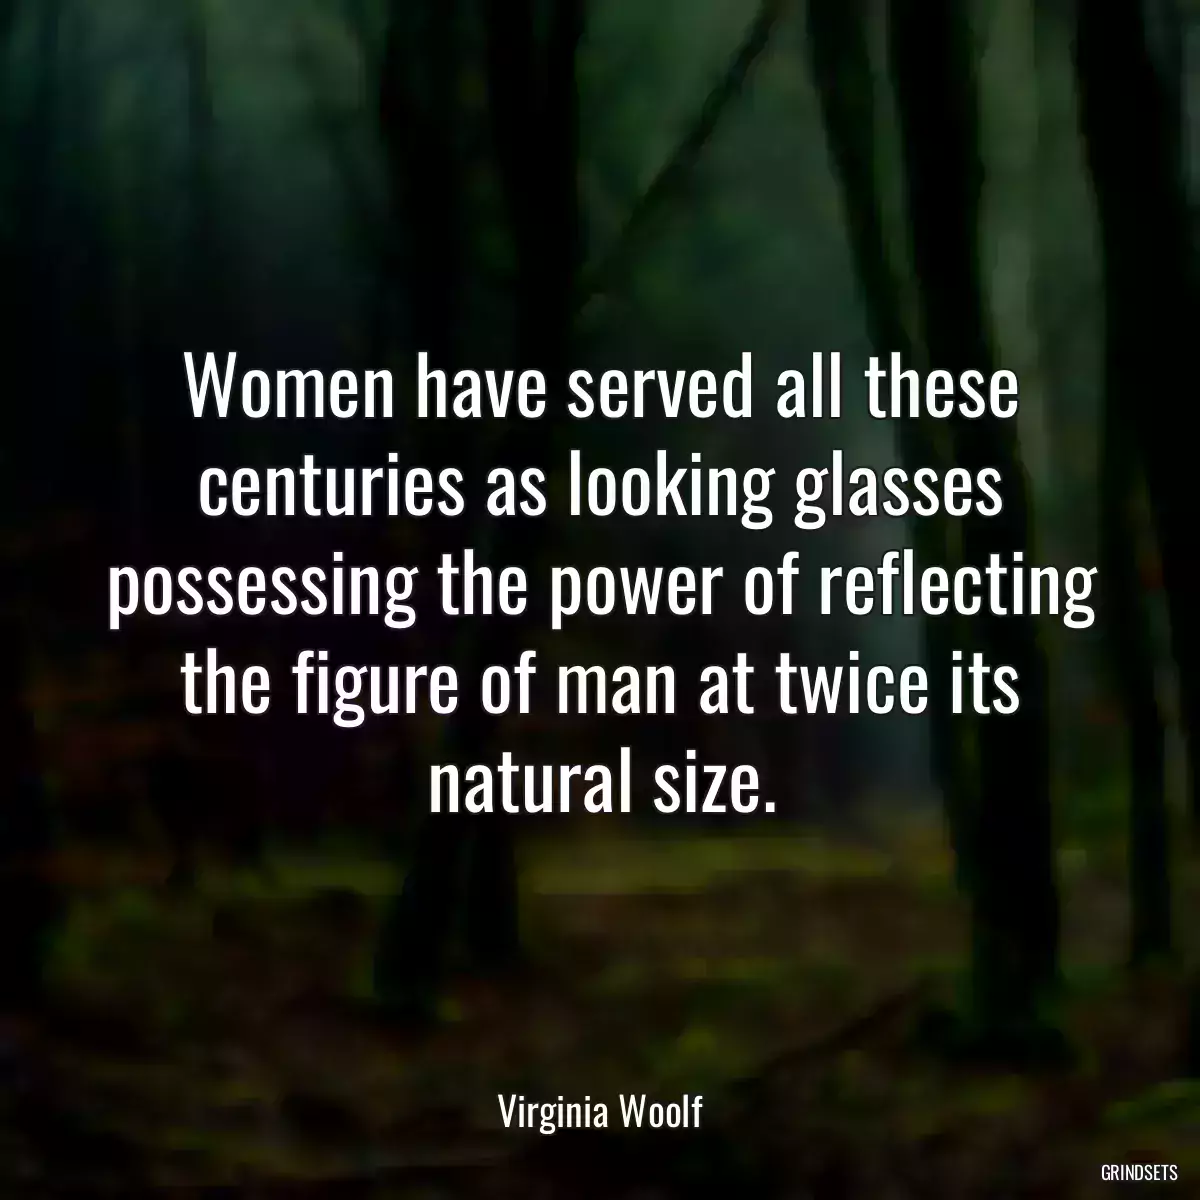 Women have served all these centuries as looking glasses possessing the power of reflecting the figure of man at twice its natural size.